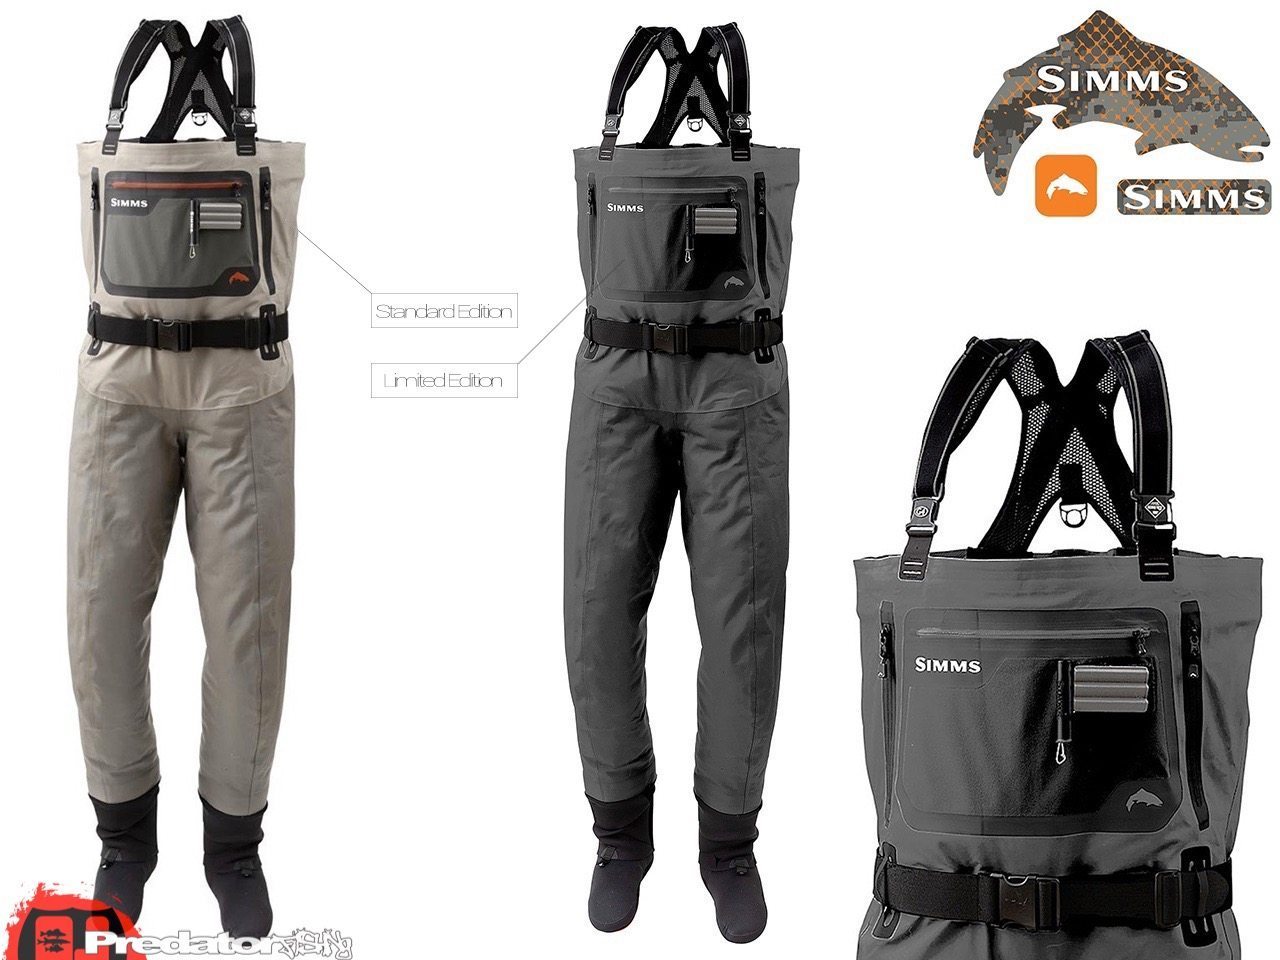 Simms G4X pro limited edition guide waders.